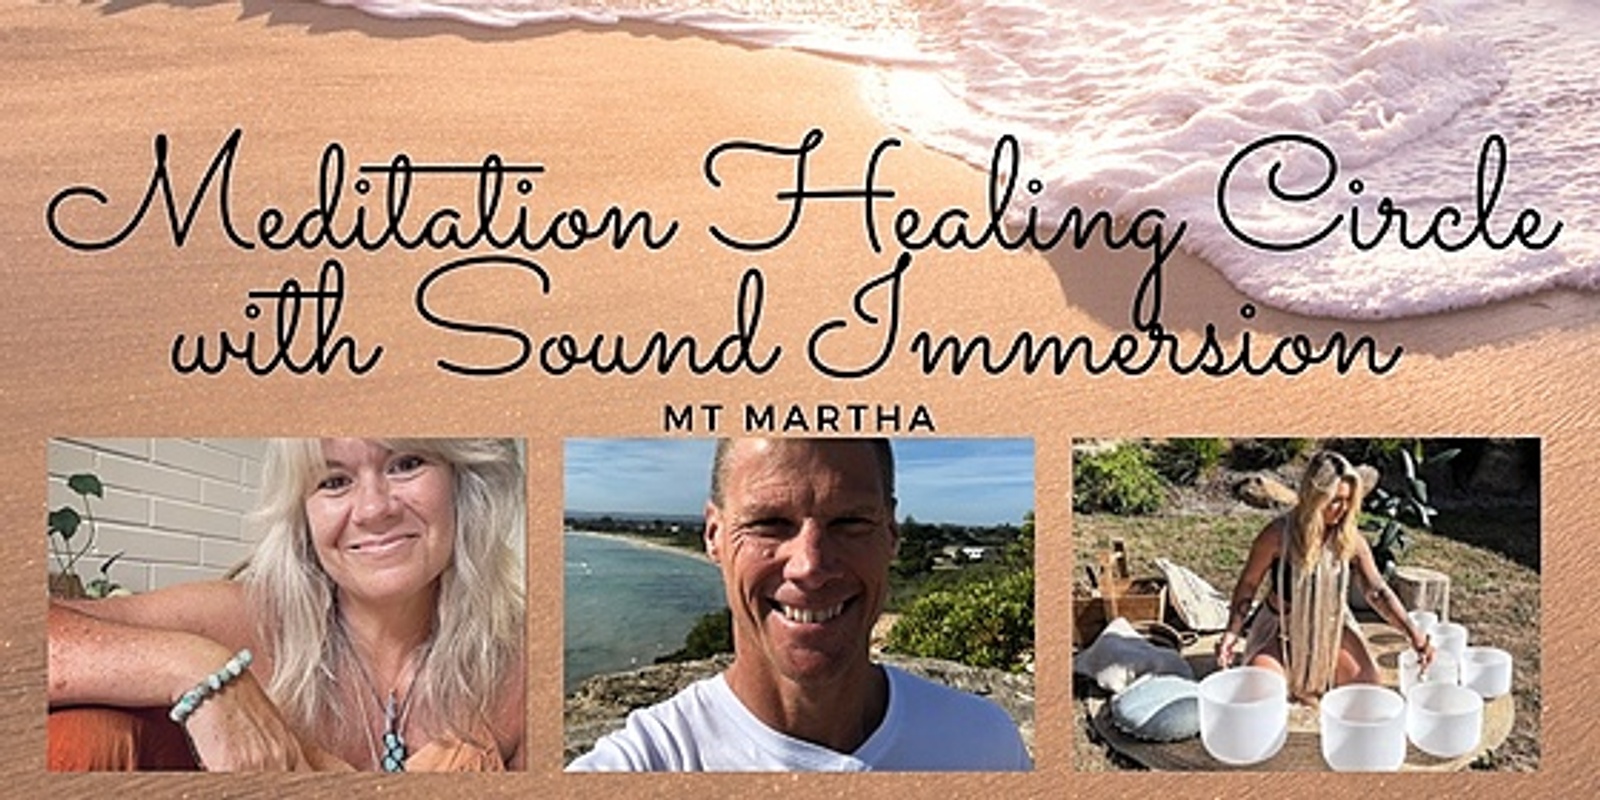 Banner image for Meditation Healing Circle with Sound Immersion 